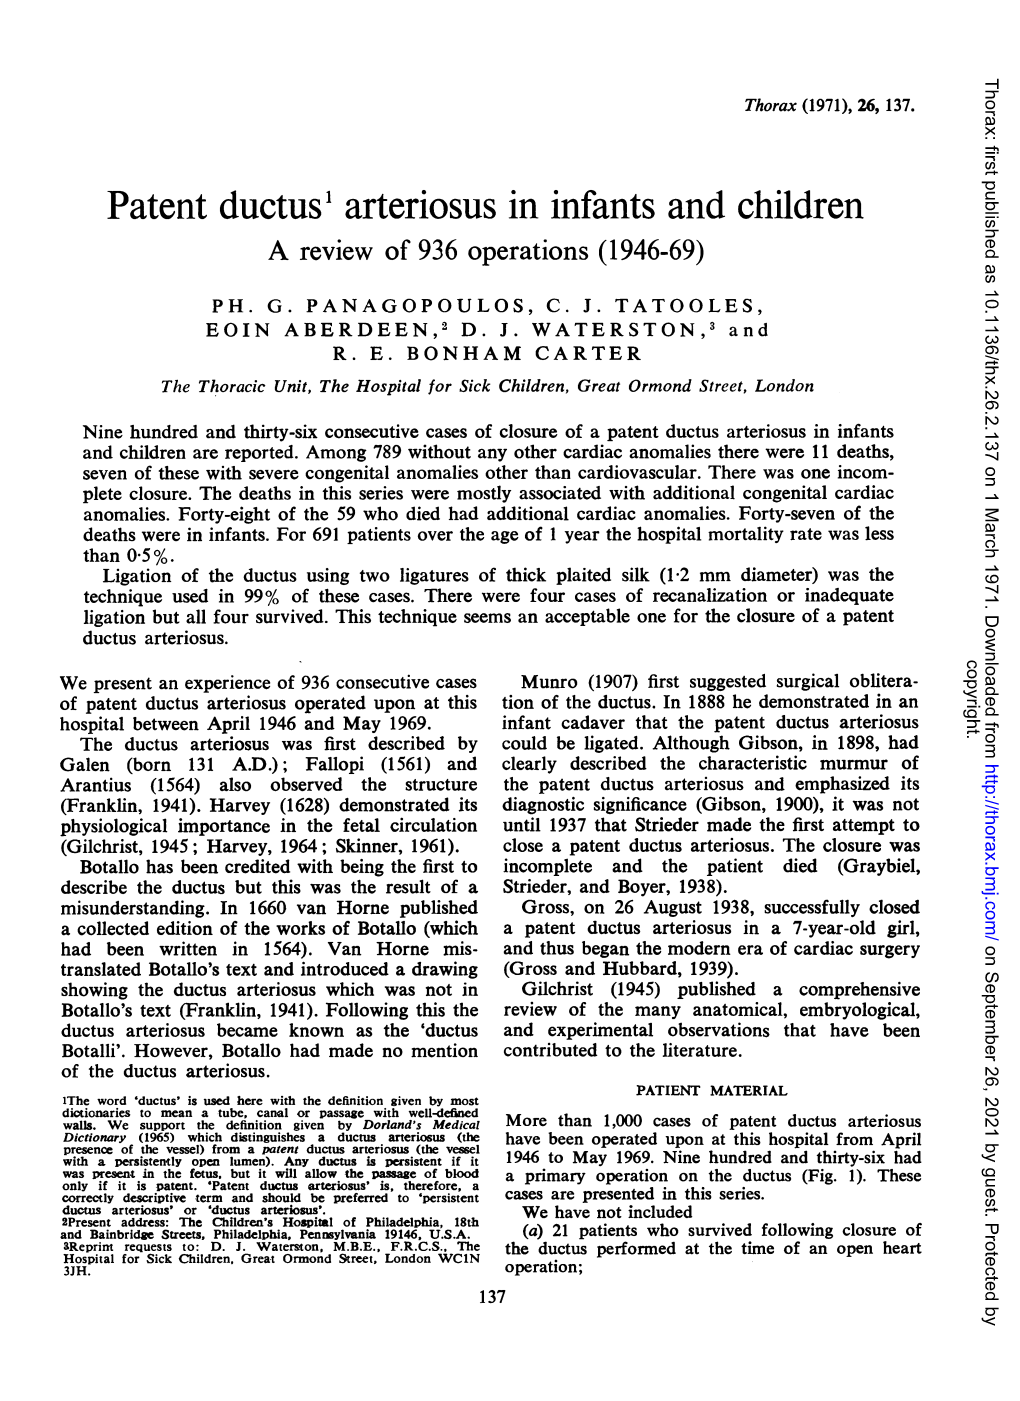 Patent Ductus1 Arteriosus in Infants and Children a Review of 936 Operations (1946-69)